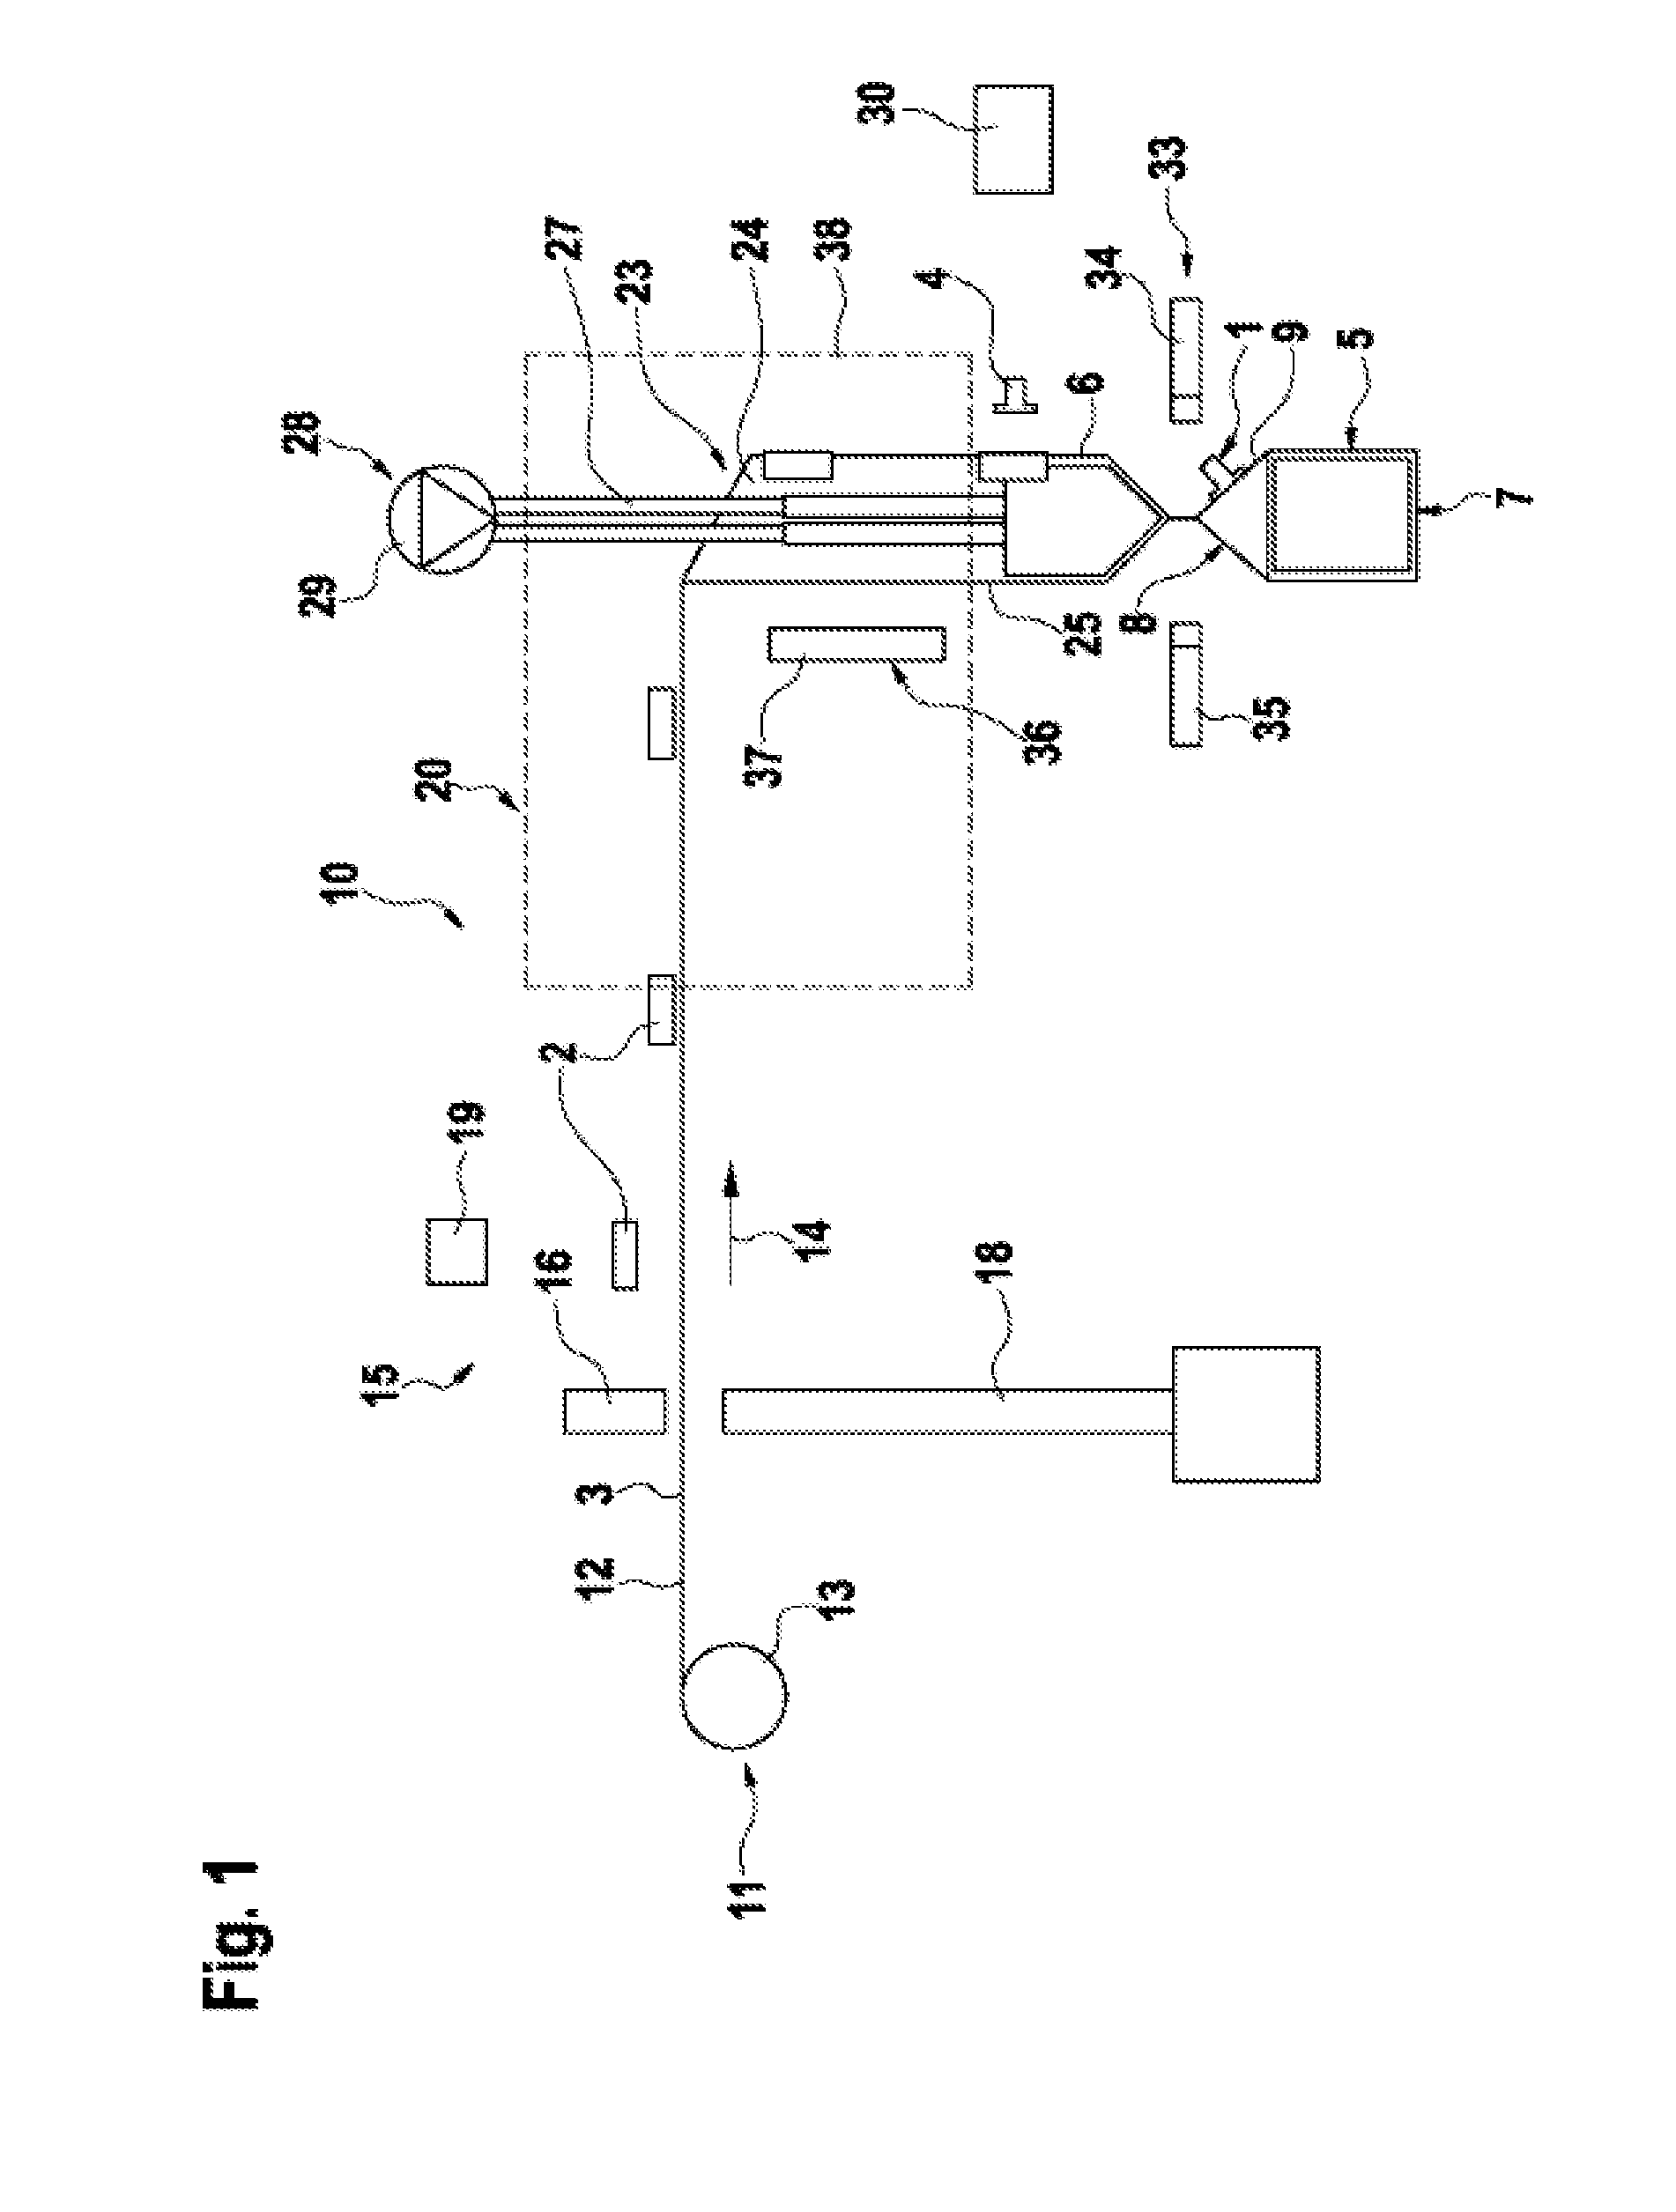 Apparatus and method for forming, filling and sealing packaging containers each comprising one pouring device